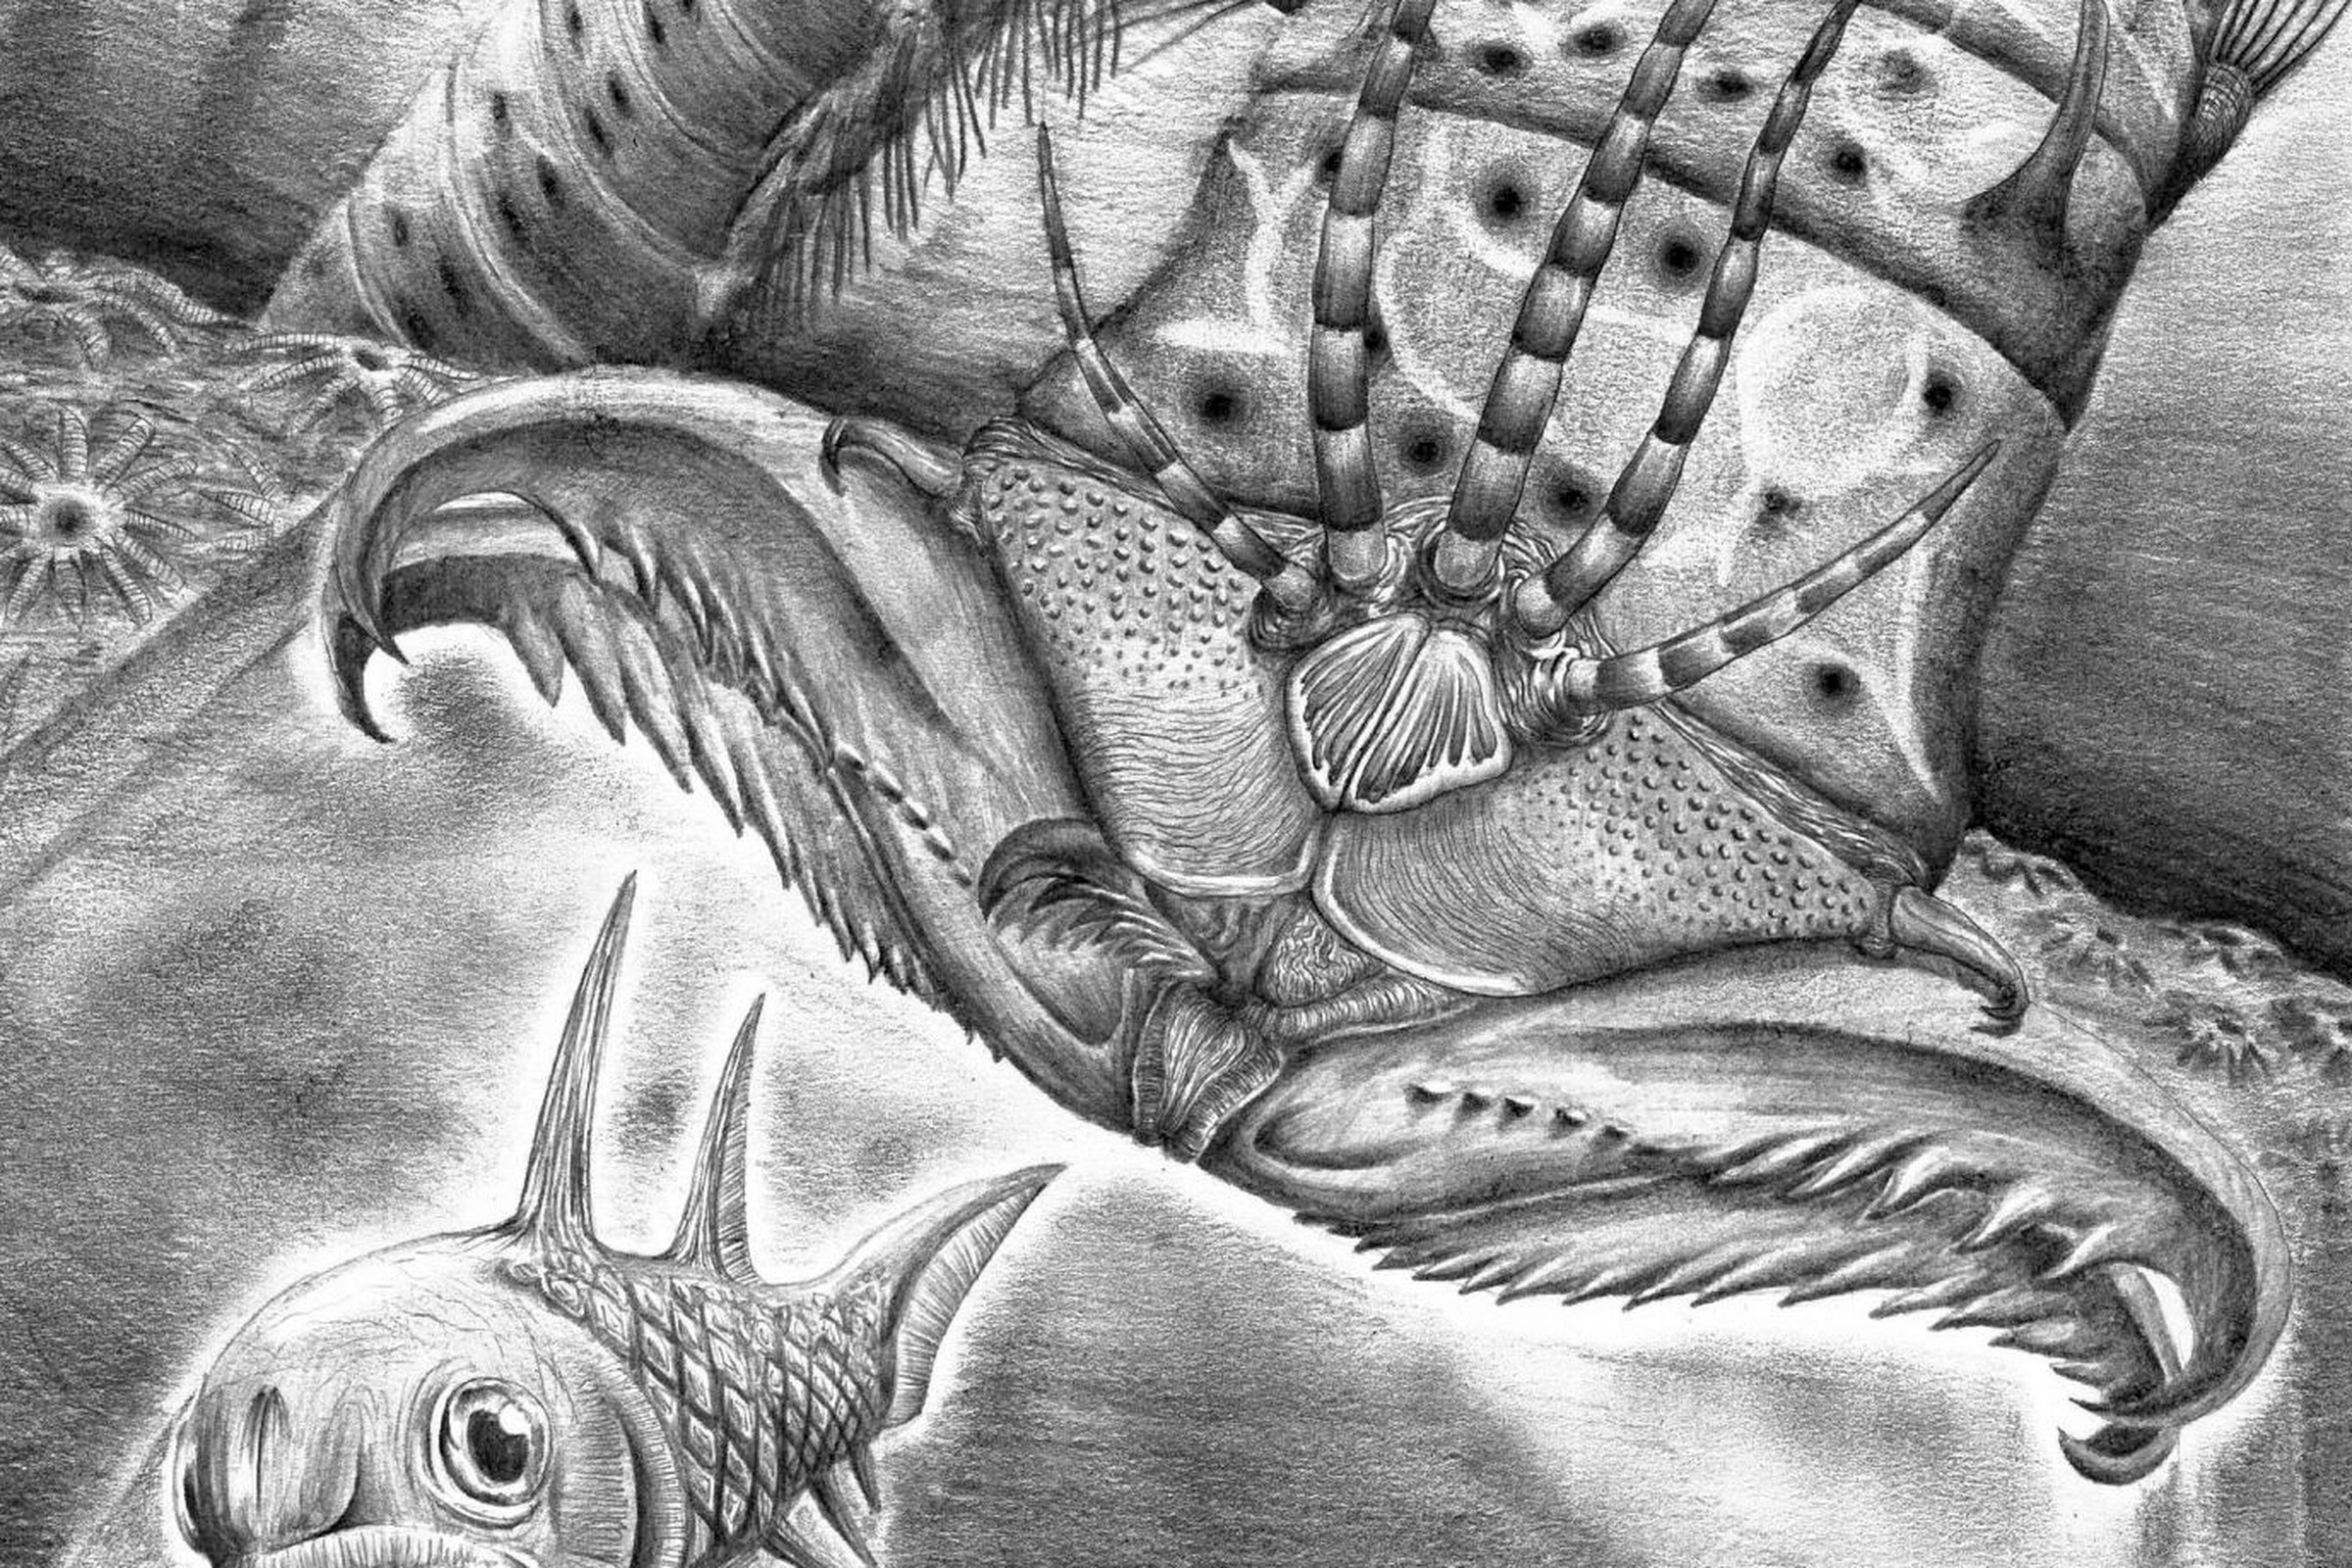 An artist’s rendering of W. armstrongi attacking a fish about 400 million years ago